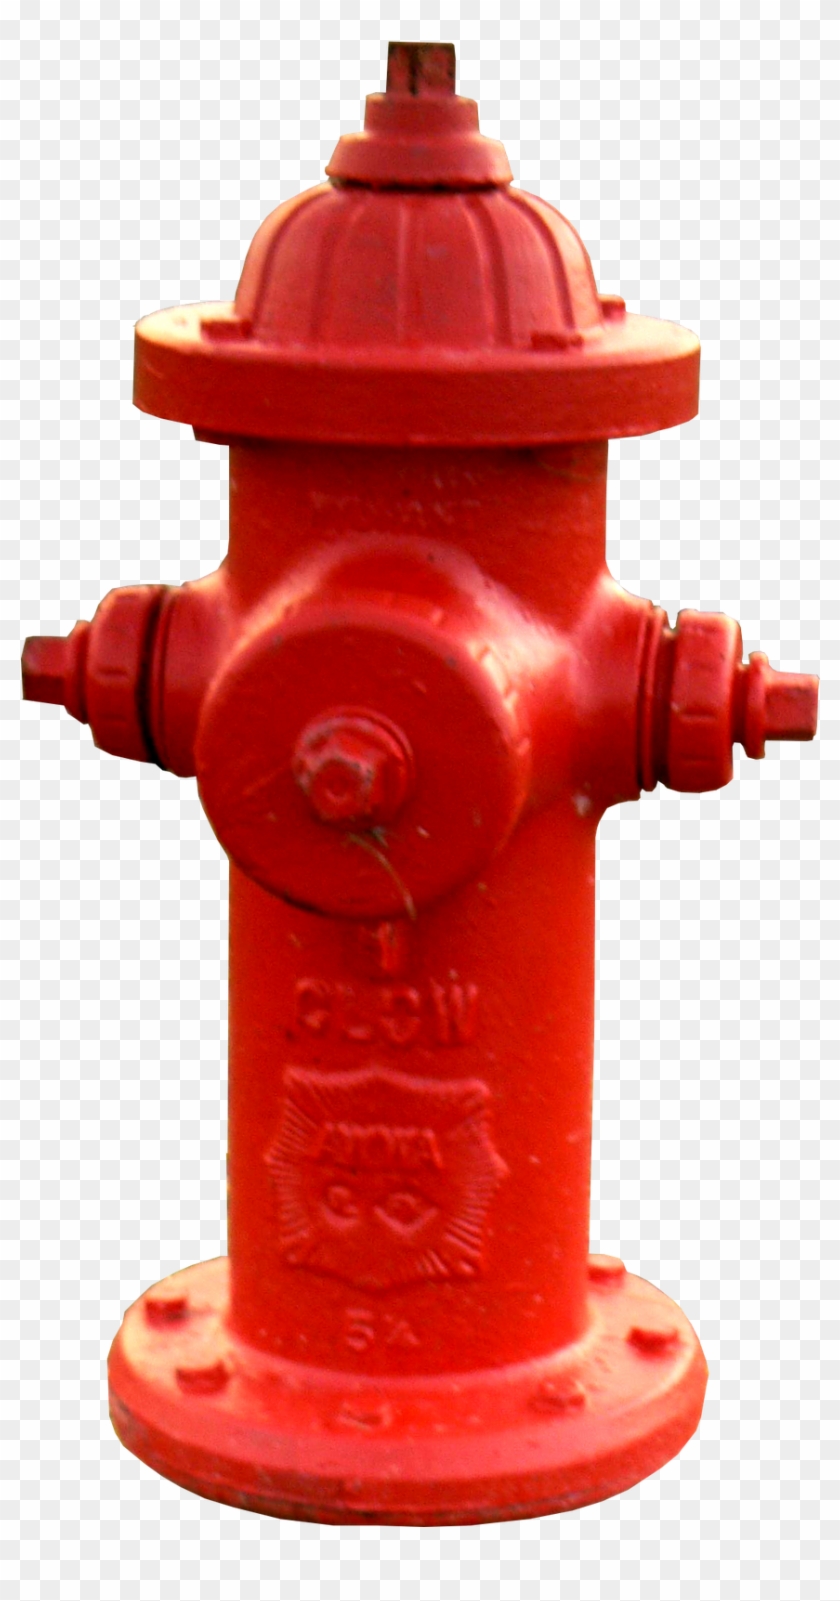 Fire Hydrant - Fire Hydrant Png #258482